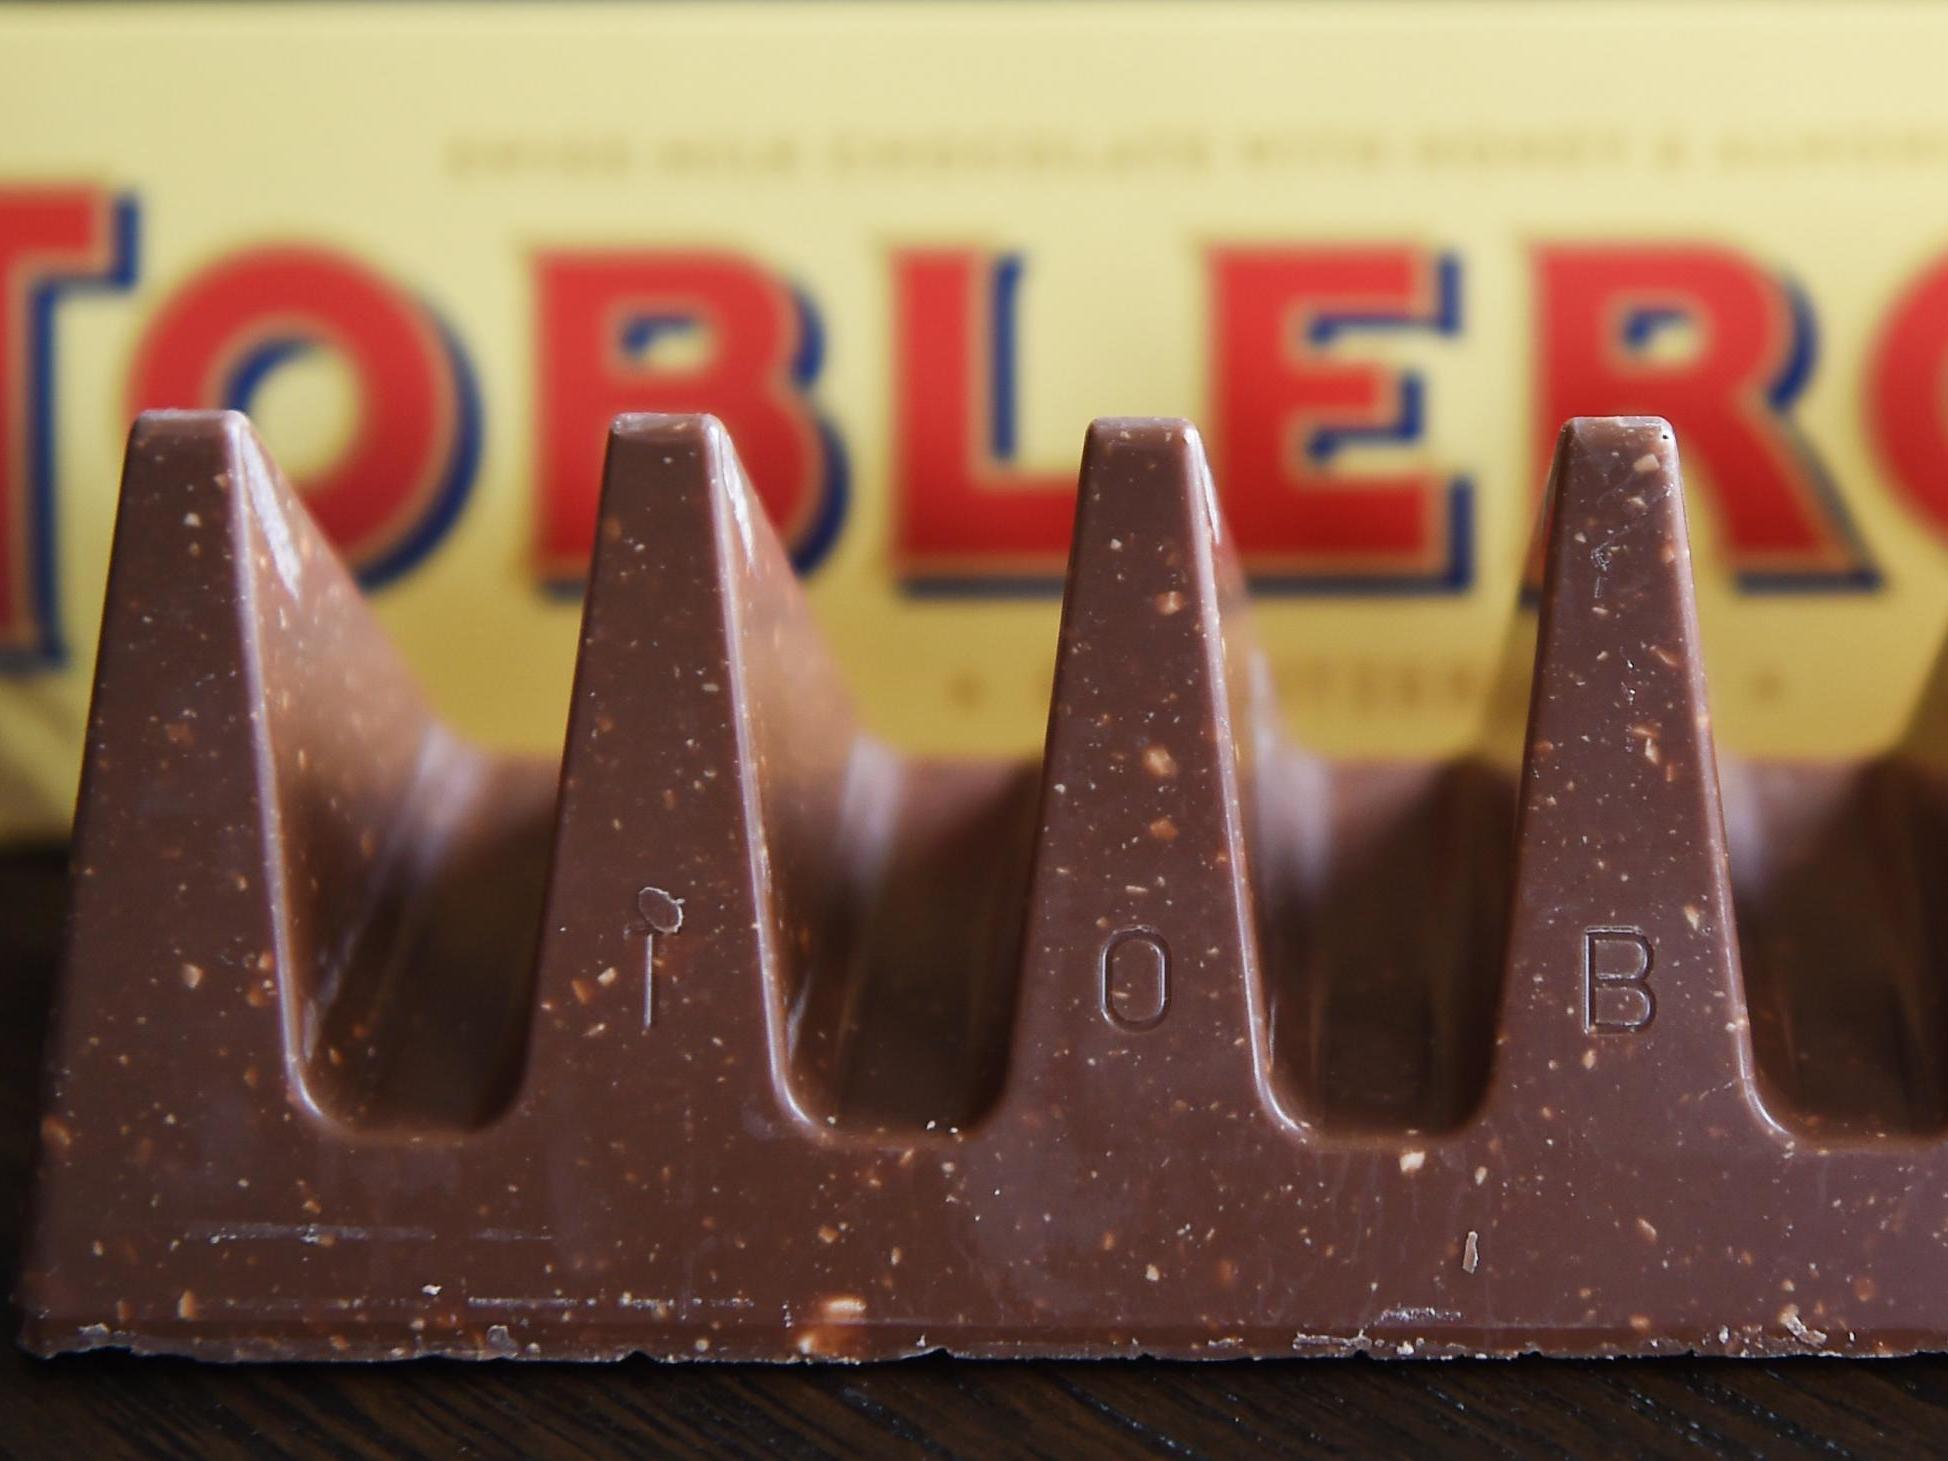 The makers of Toblerone announced the chocolate bar has been halal certified since April